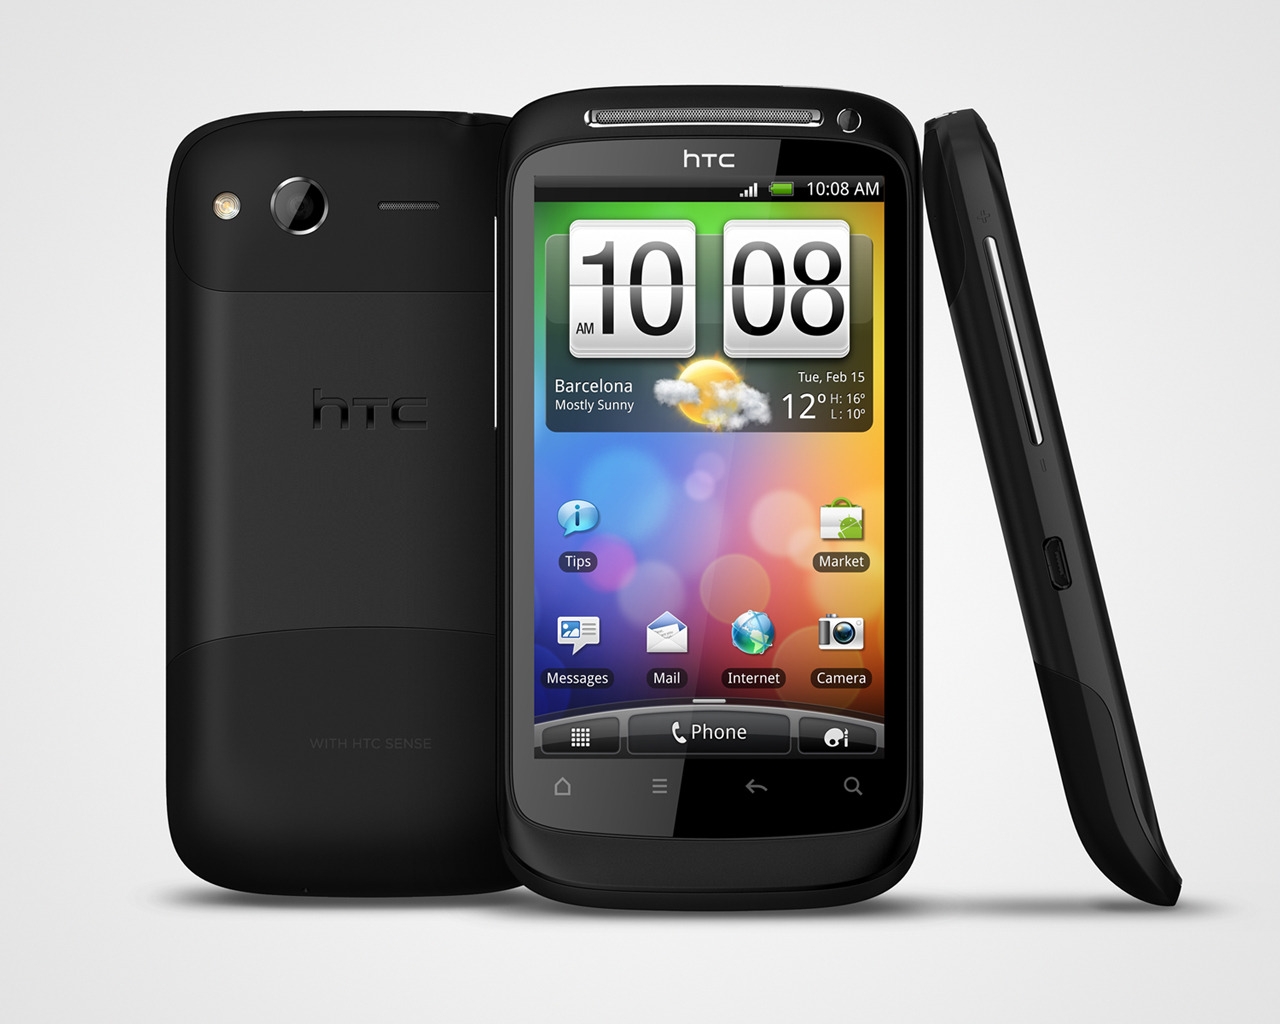 HTC Desire S for 1280 x 1024 resolution